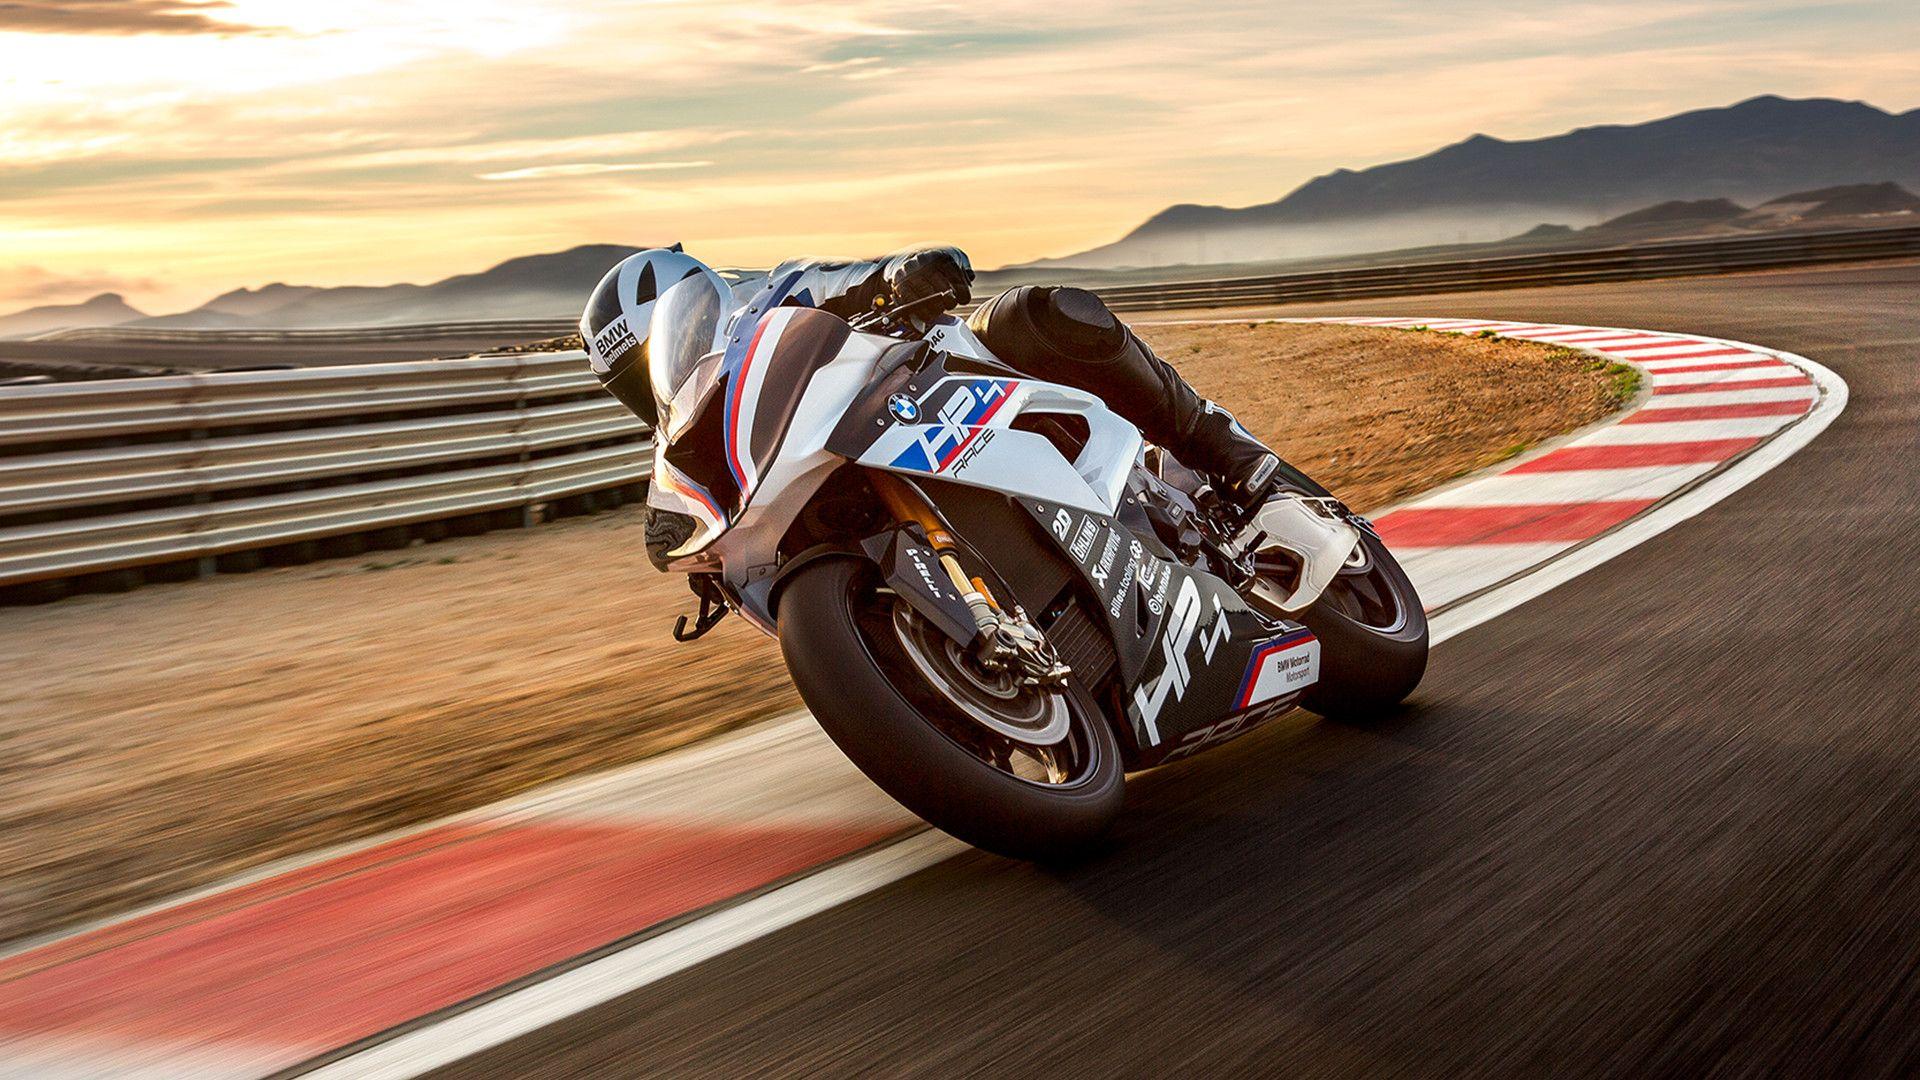 BMW's New HP4 Race Bike is Absolutely Bonkers. Southern